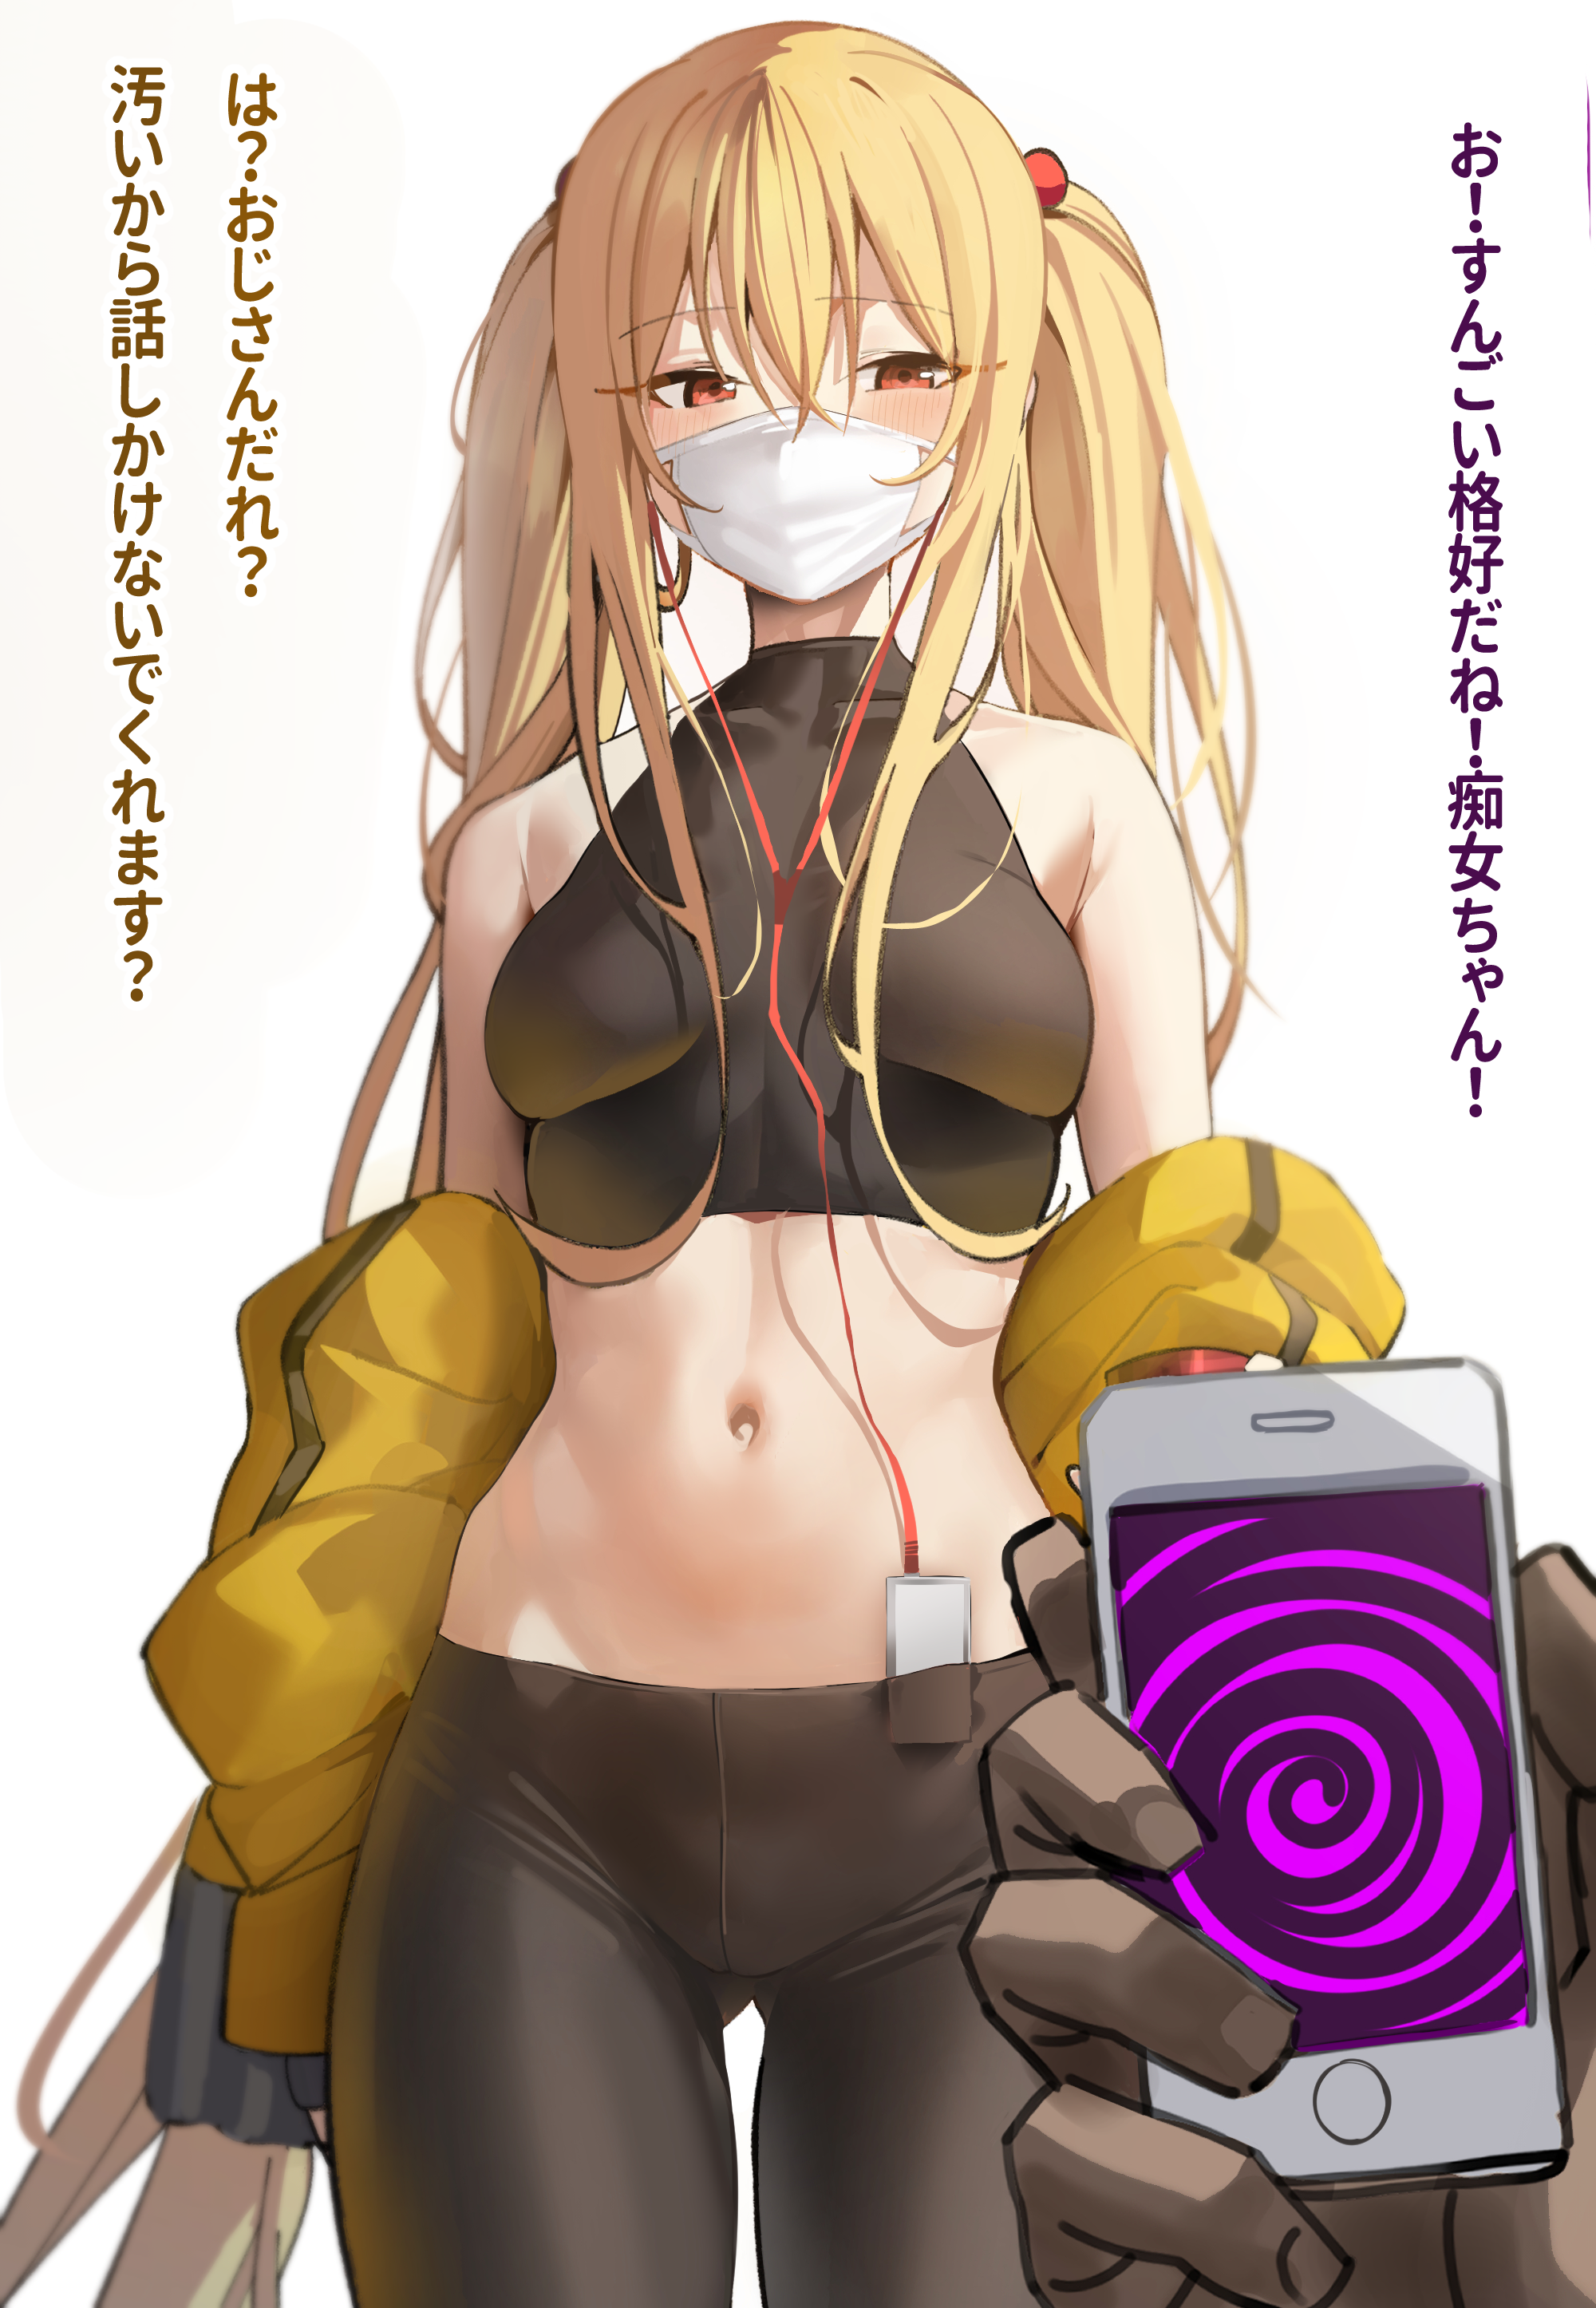 Anime 2000x2892 K pring blonde belly belly button bare shoulders red eyes mask smartphone jacket yoga pants boobs music player earphones long hair bare midriff crop top anime girls artwork standing